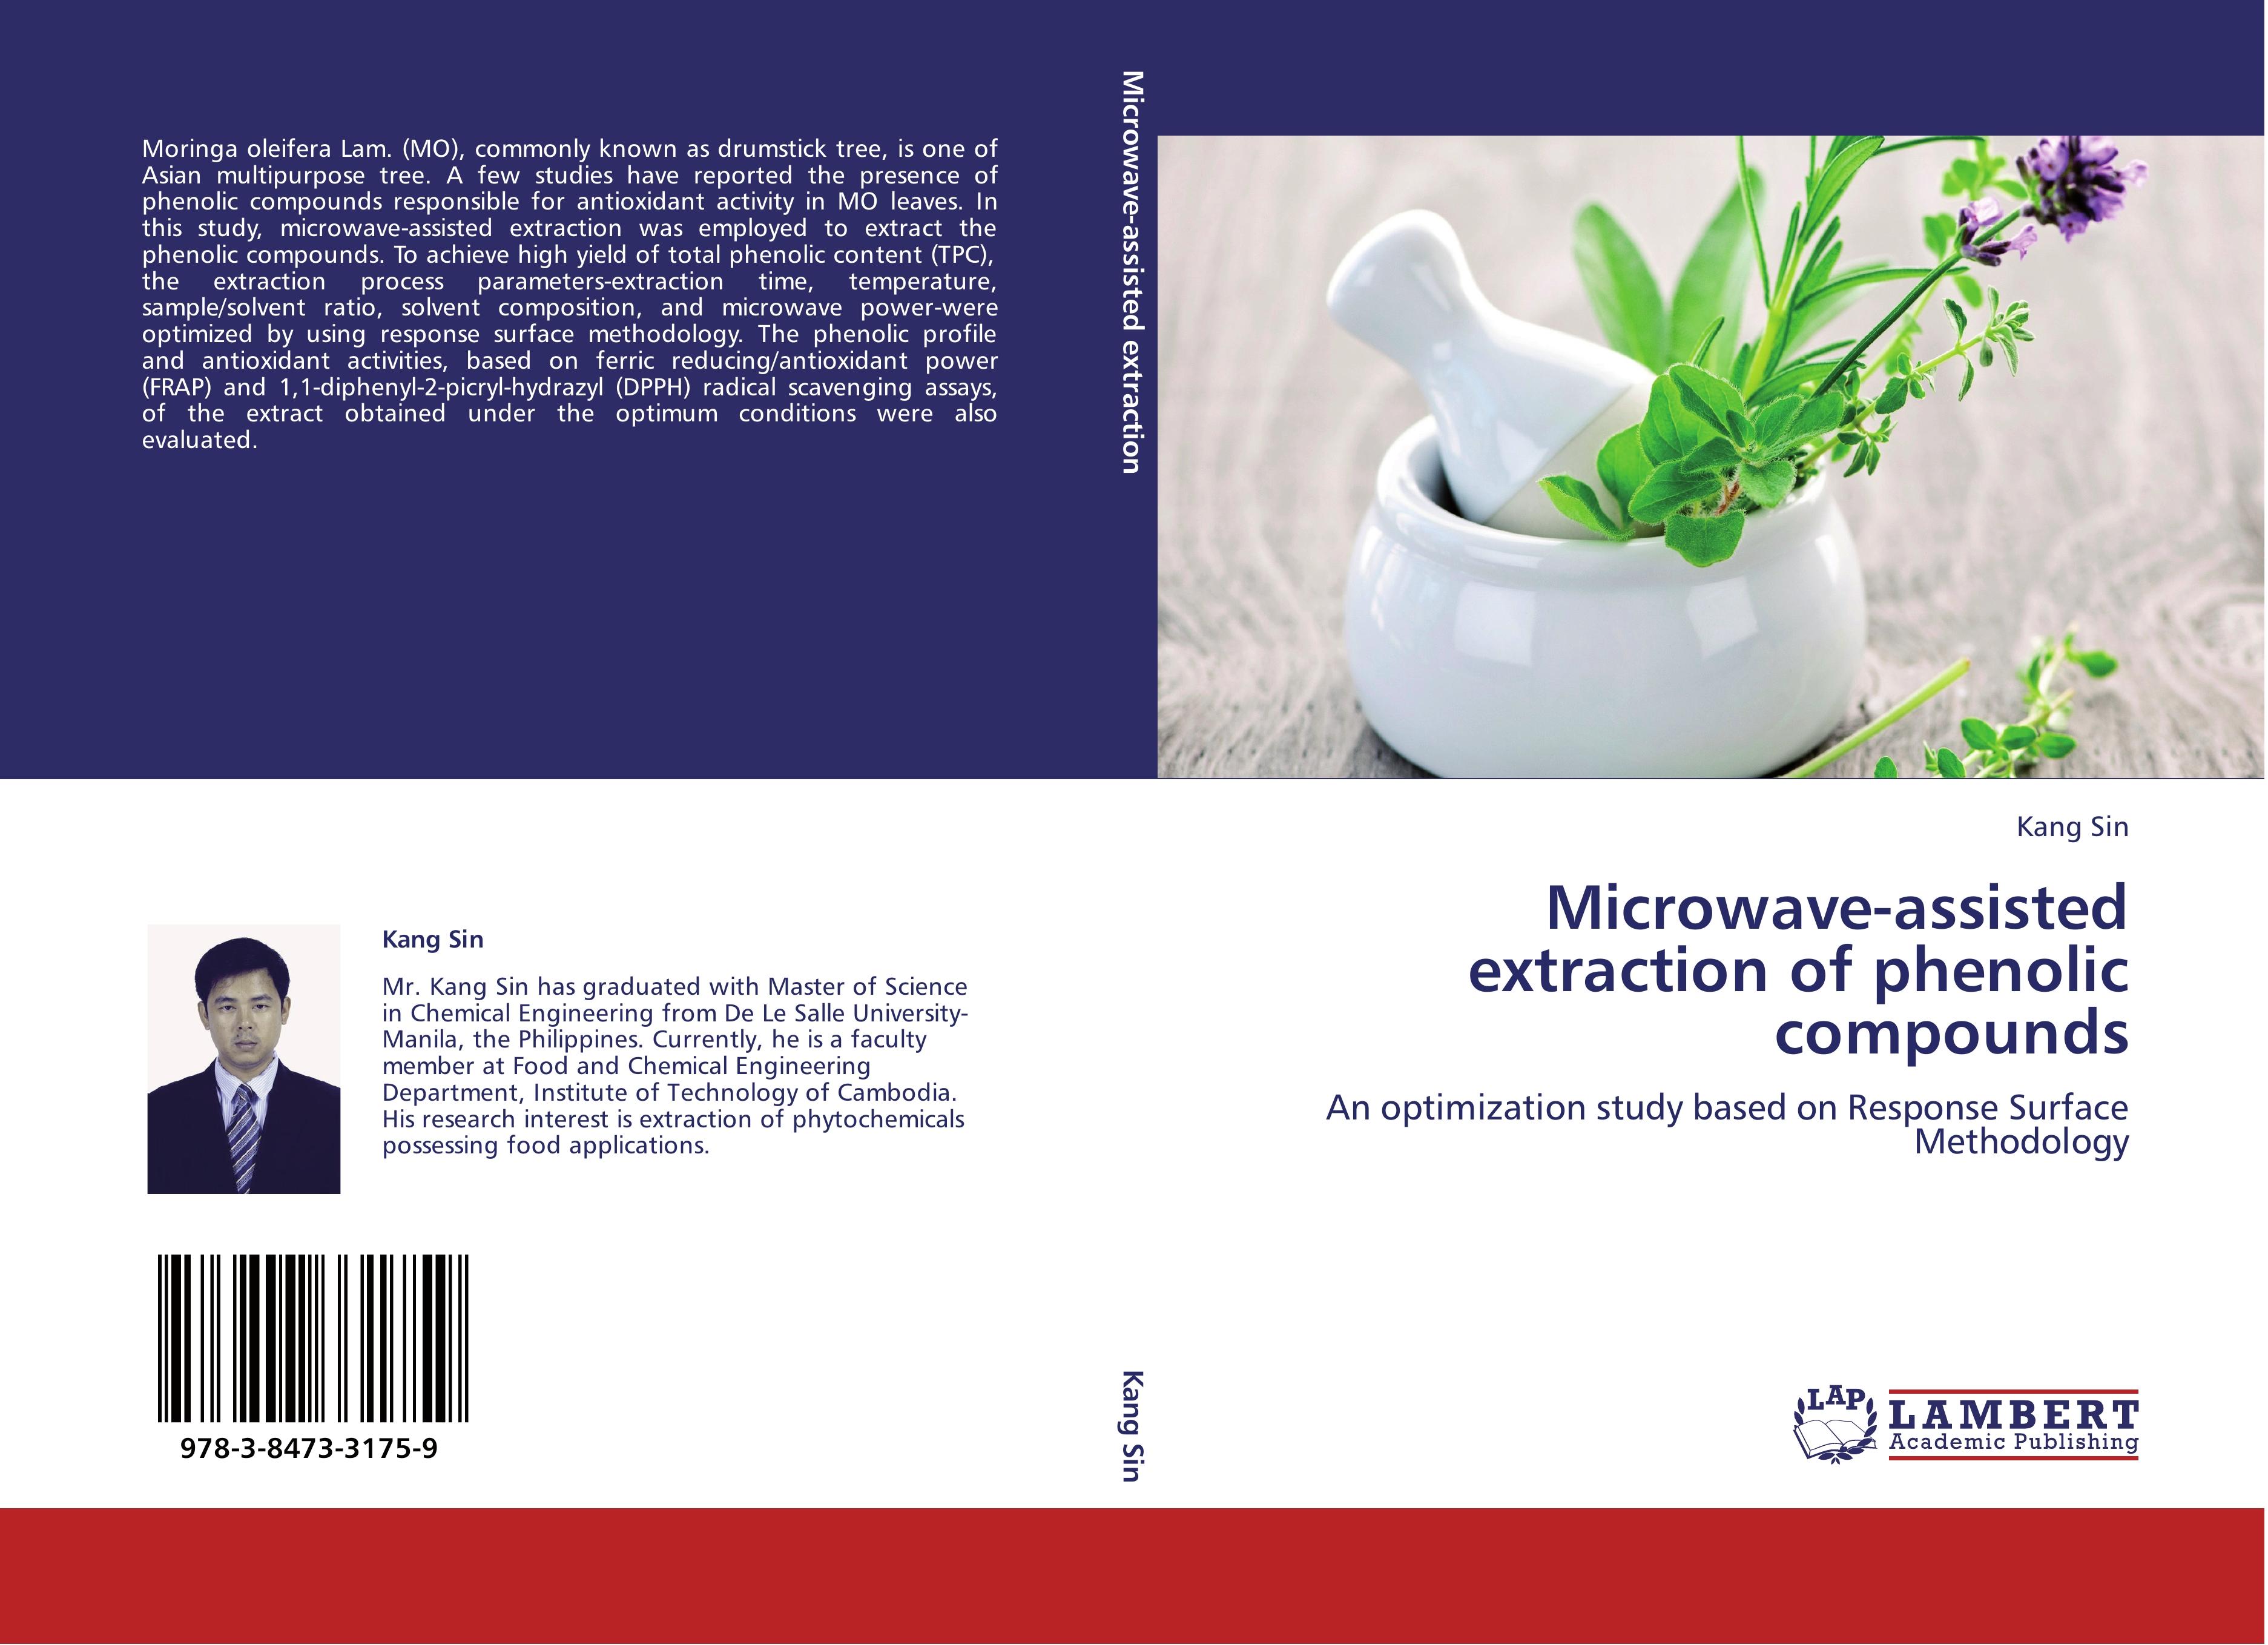 Microwave-assisted extraction of phenolic compounds - Sin, Kang